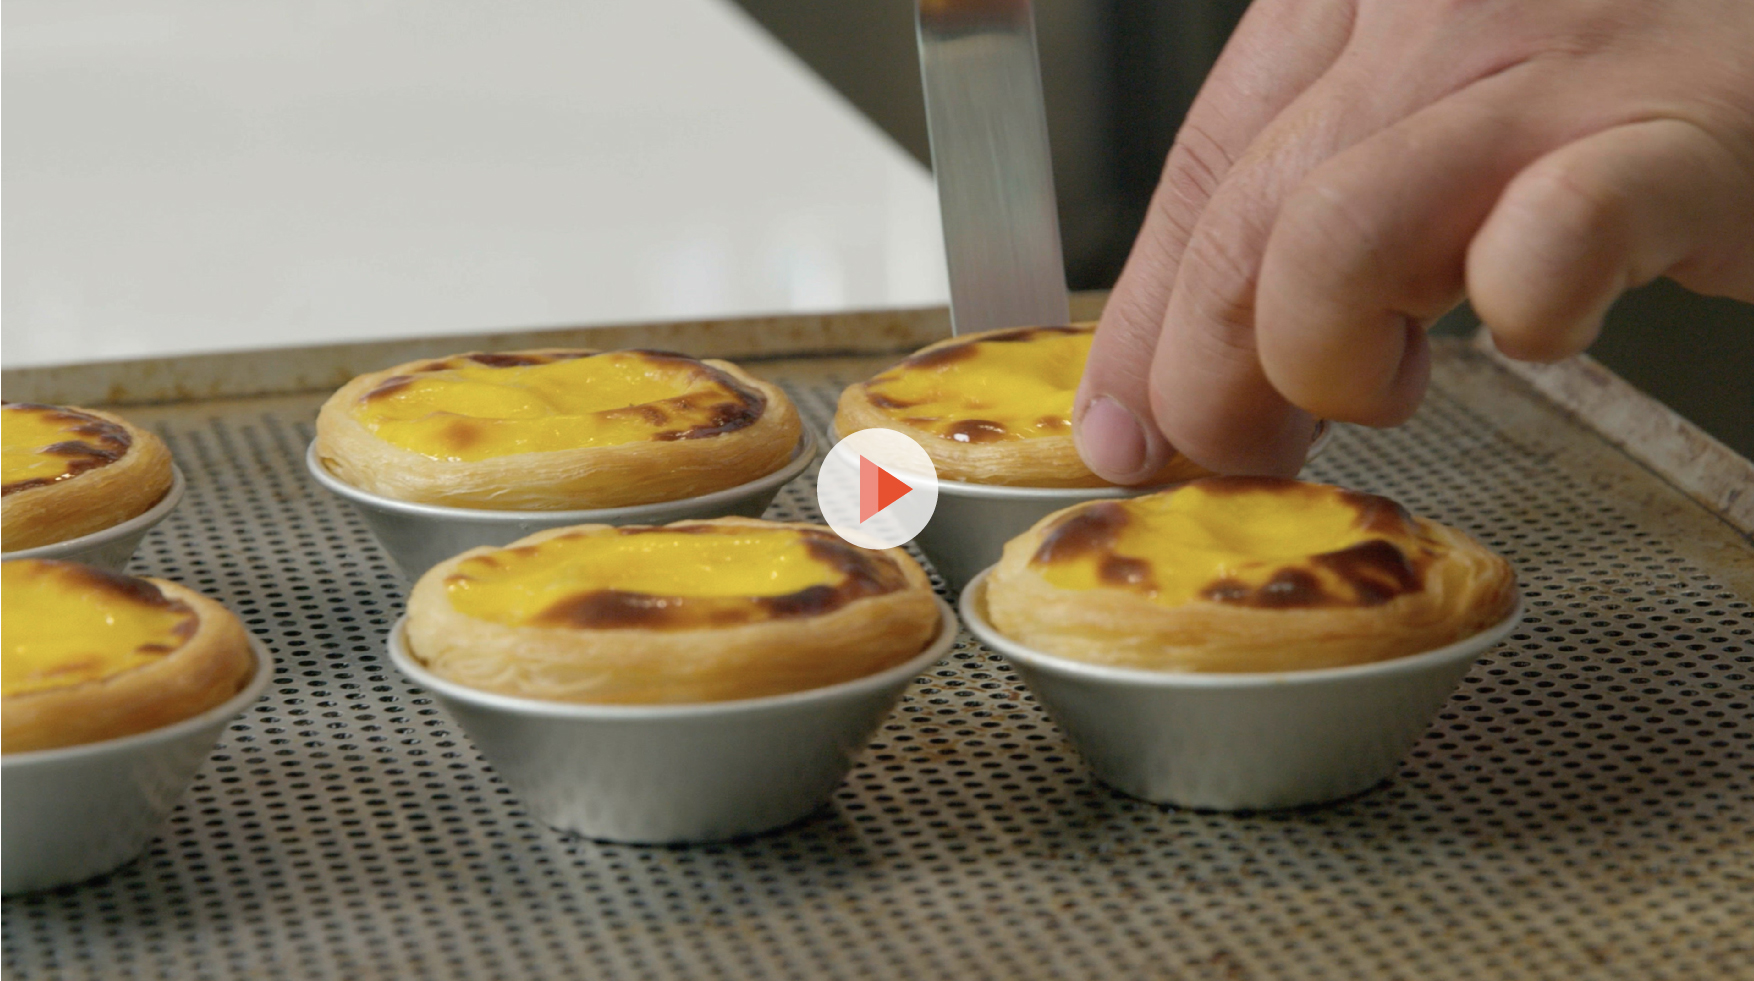 Taste the differences between Macao 澳洲幸运5官方开奖体彩网 and Portuguese egg tarts